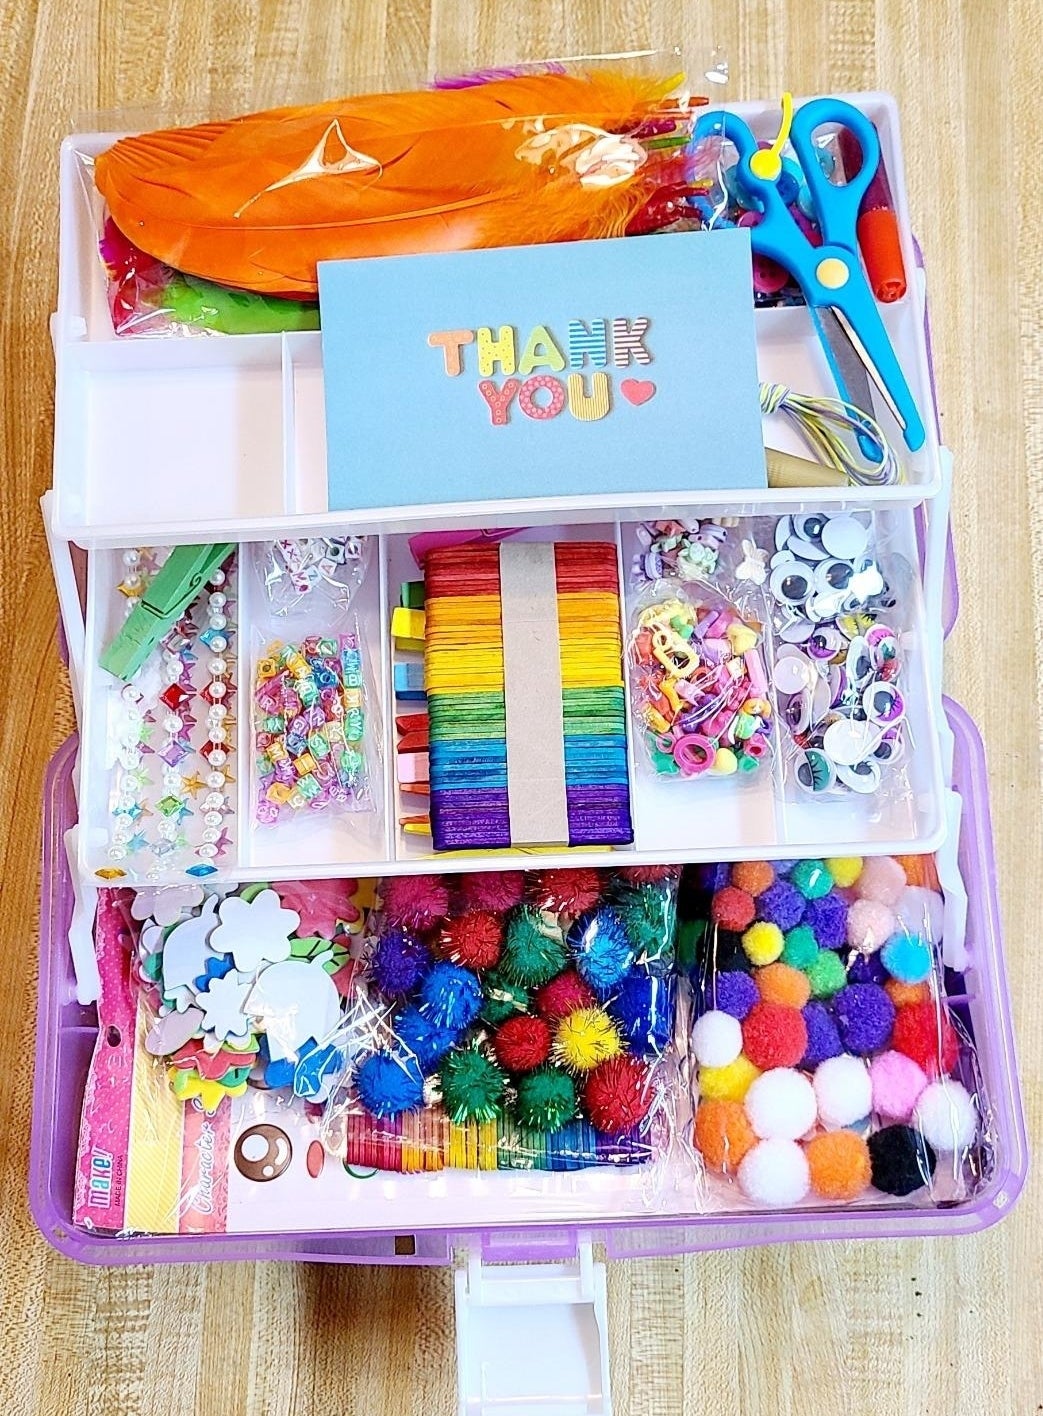 Craft supply kit with crafts